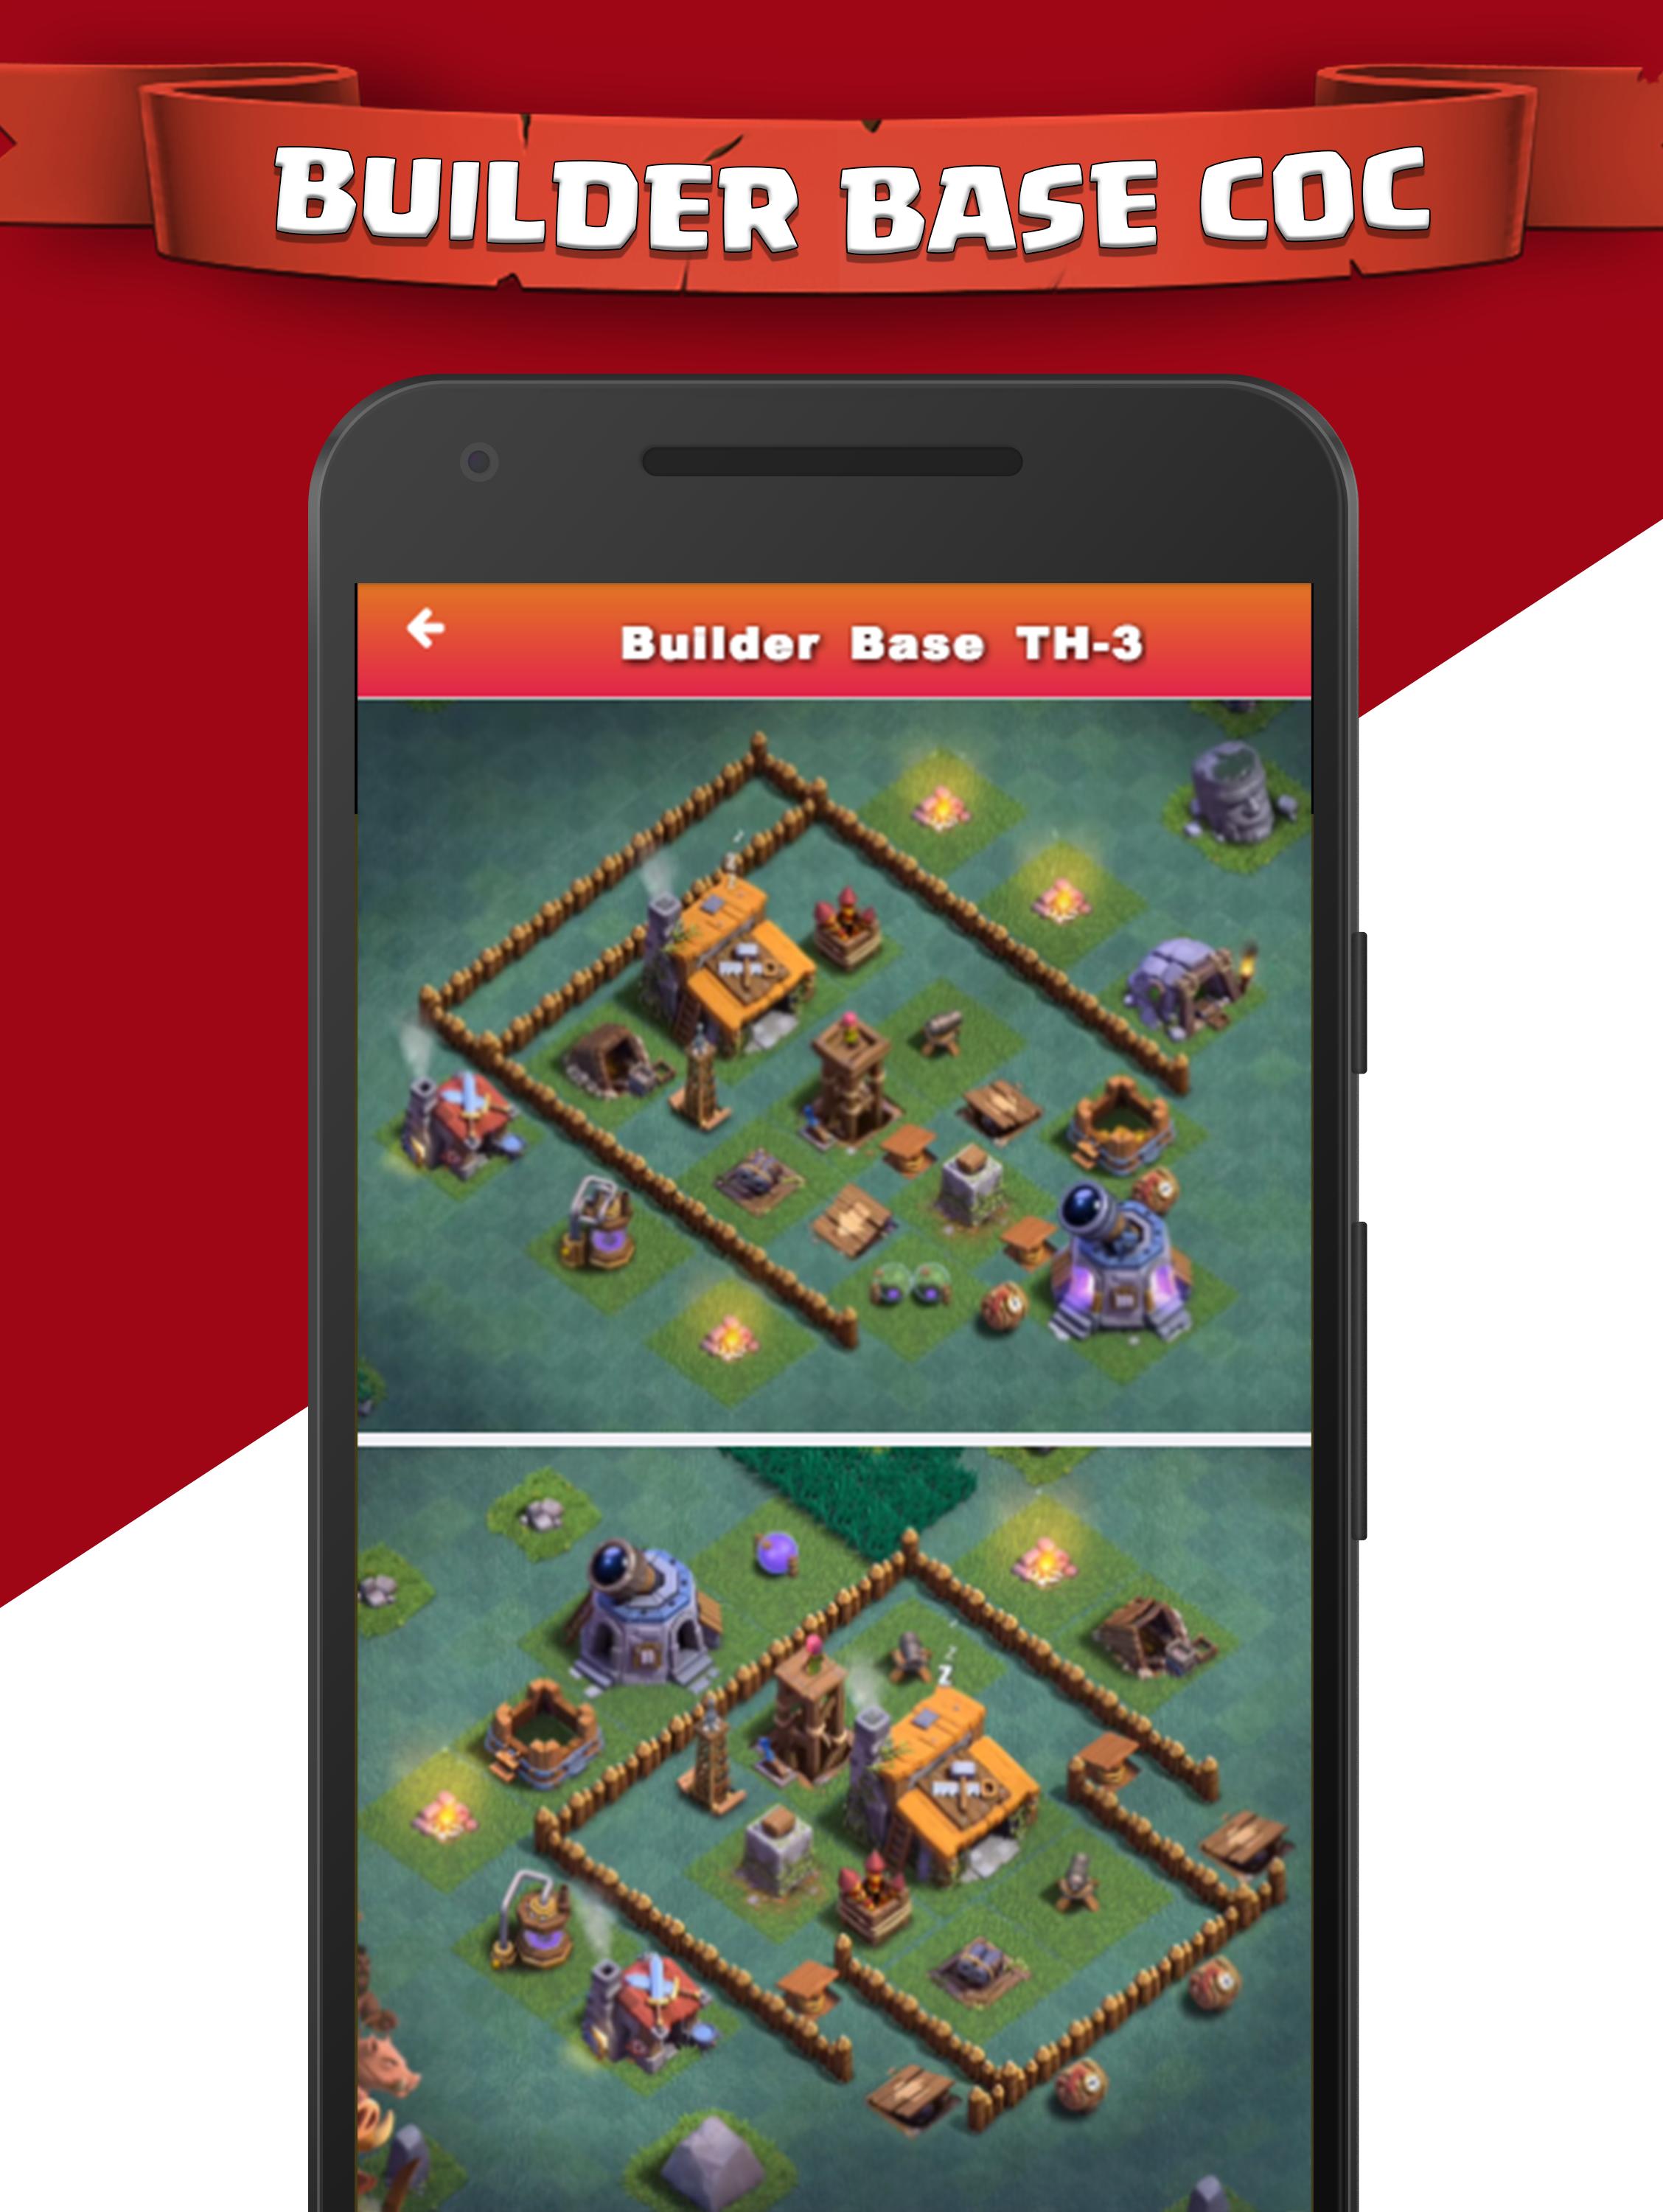 Builder Base COC for Android - APK Download